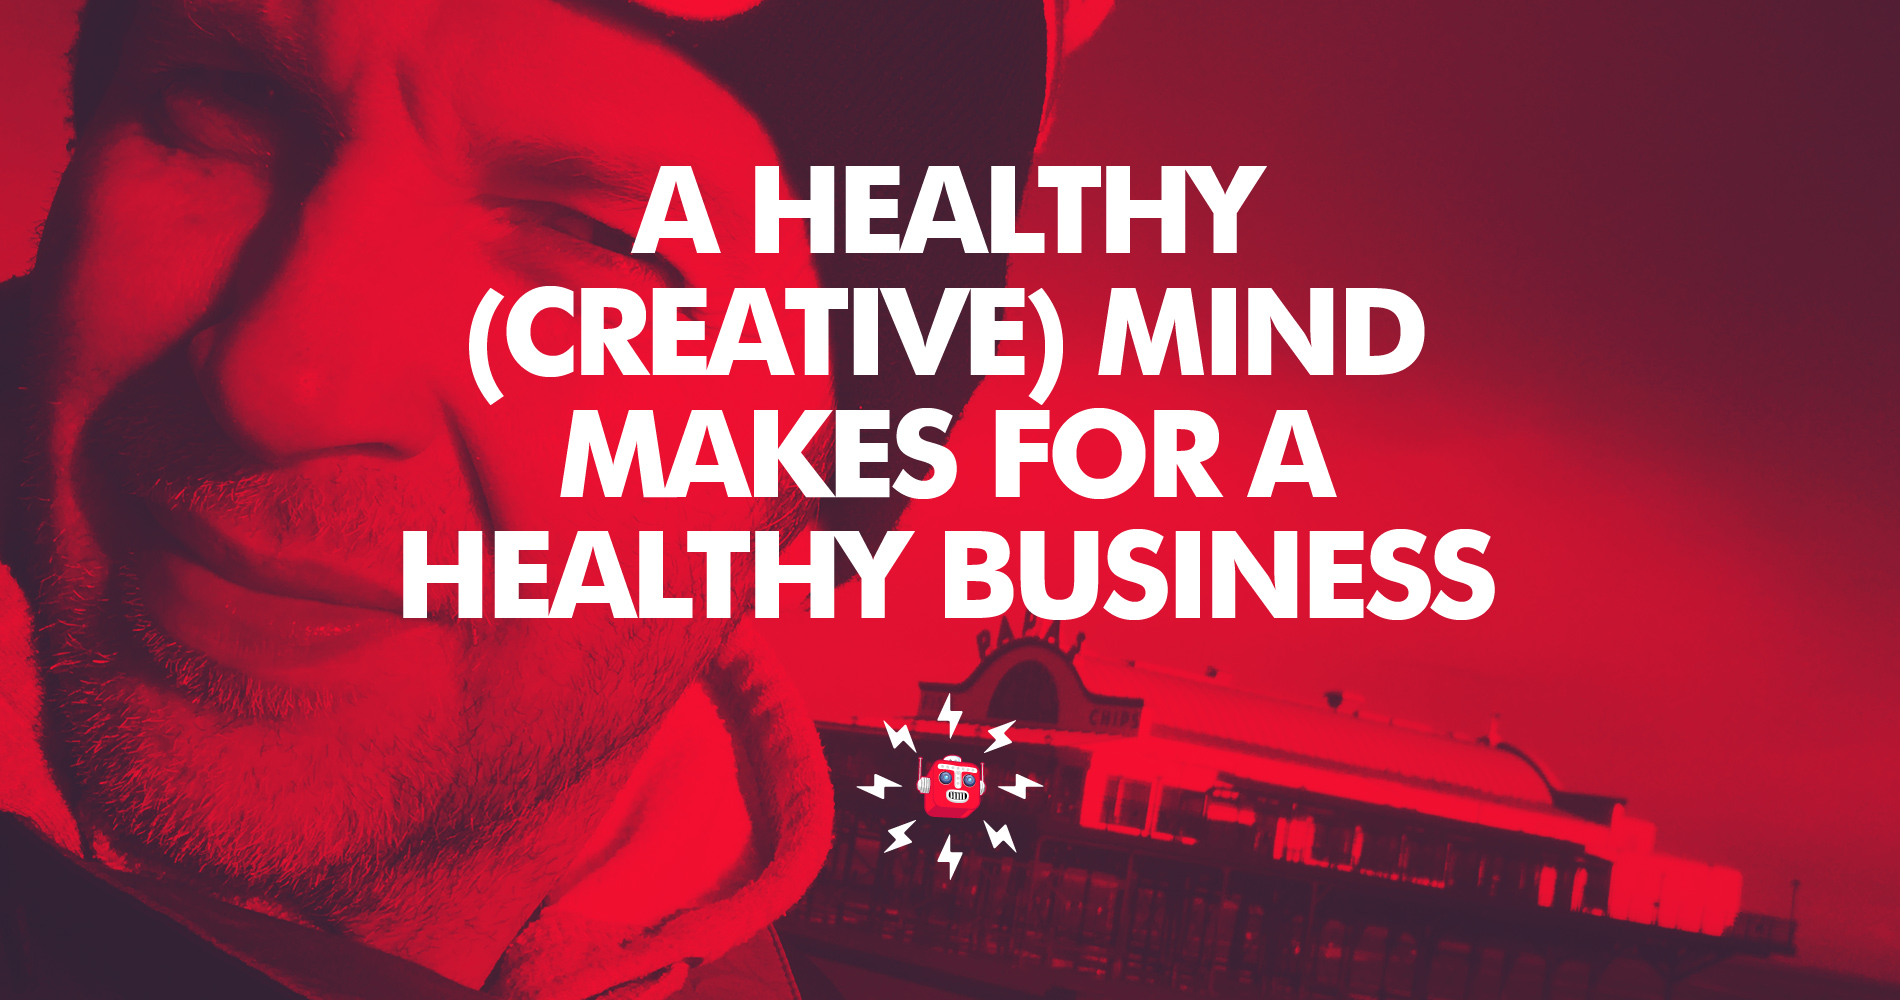 A Healthy Creative Mind Makes For A Healthy Business